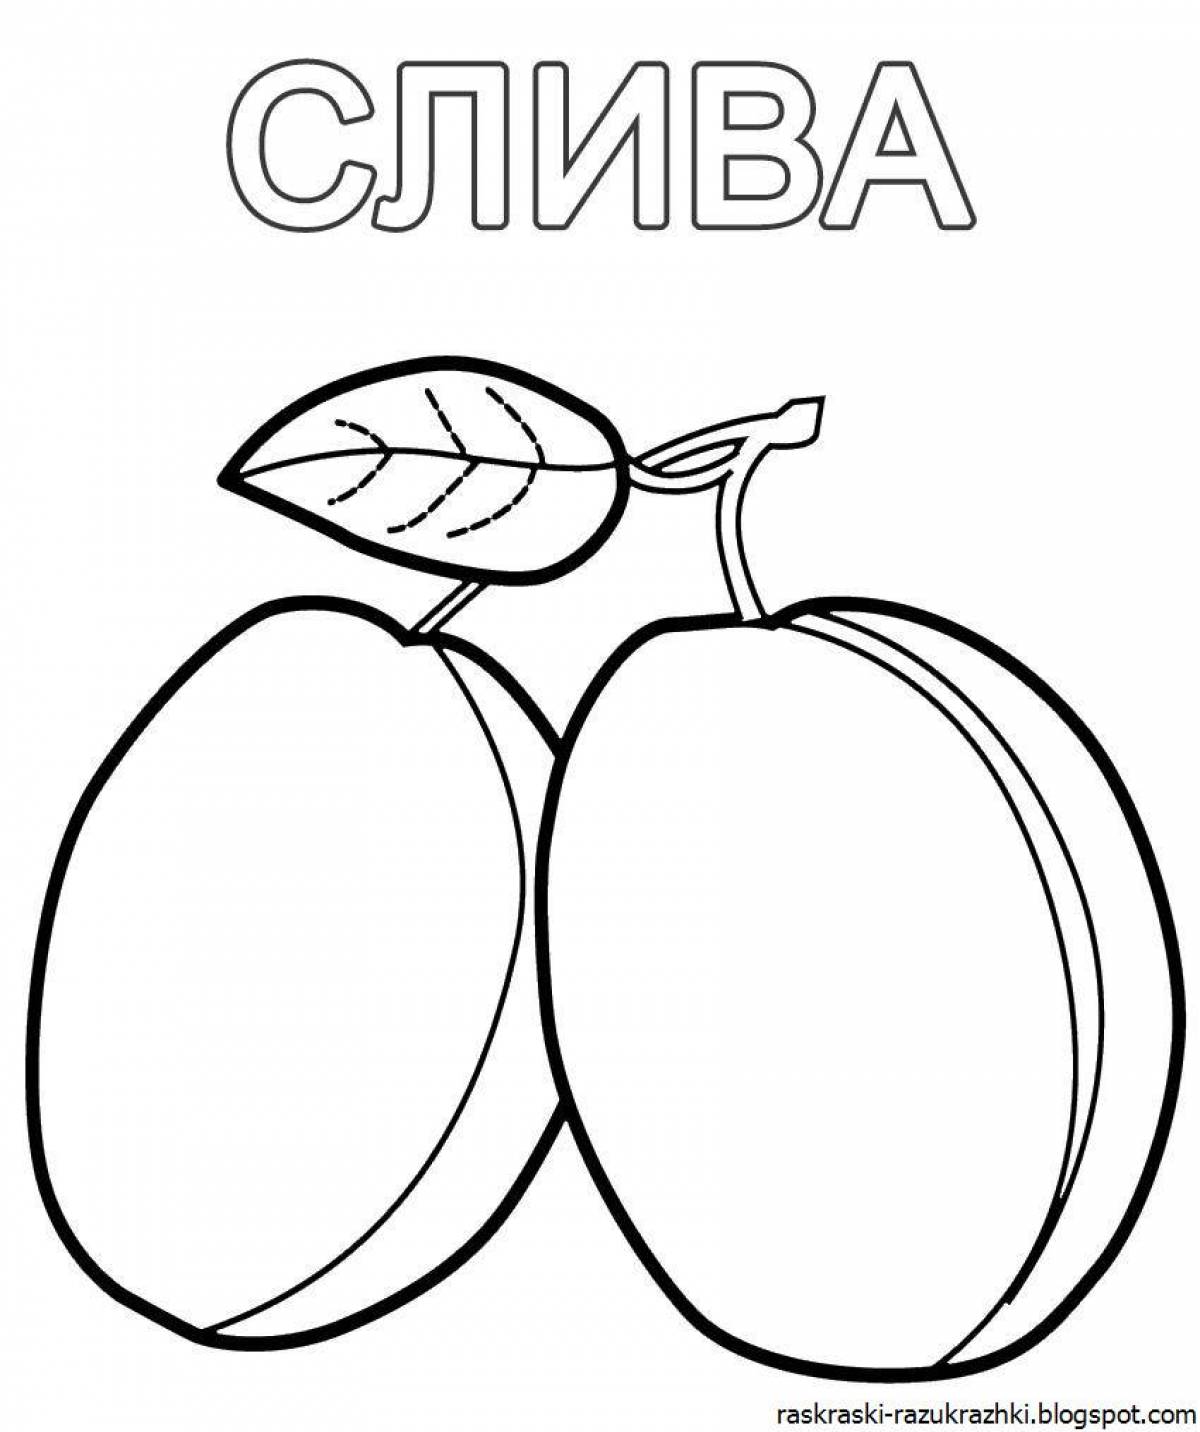 Radiating vegetables coloring page